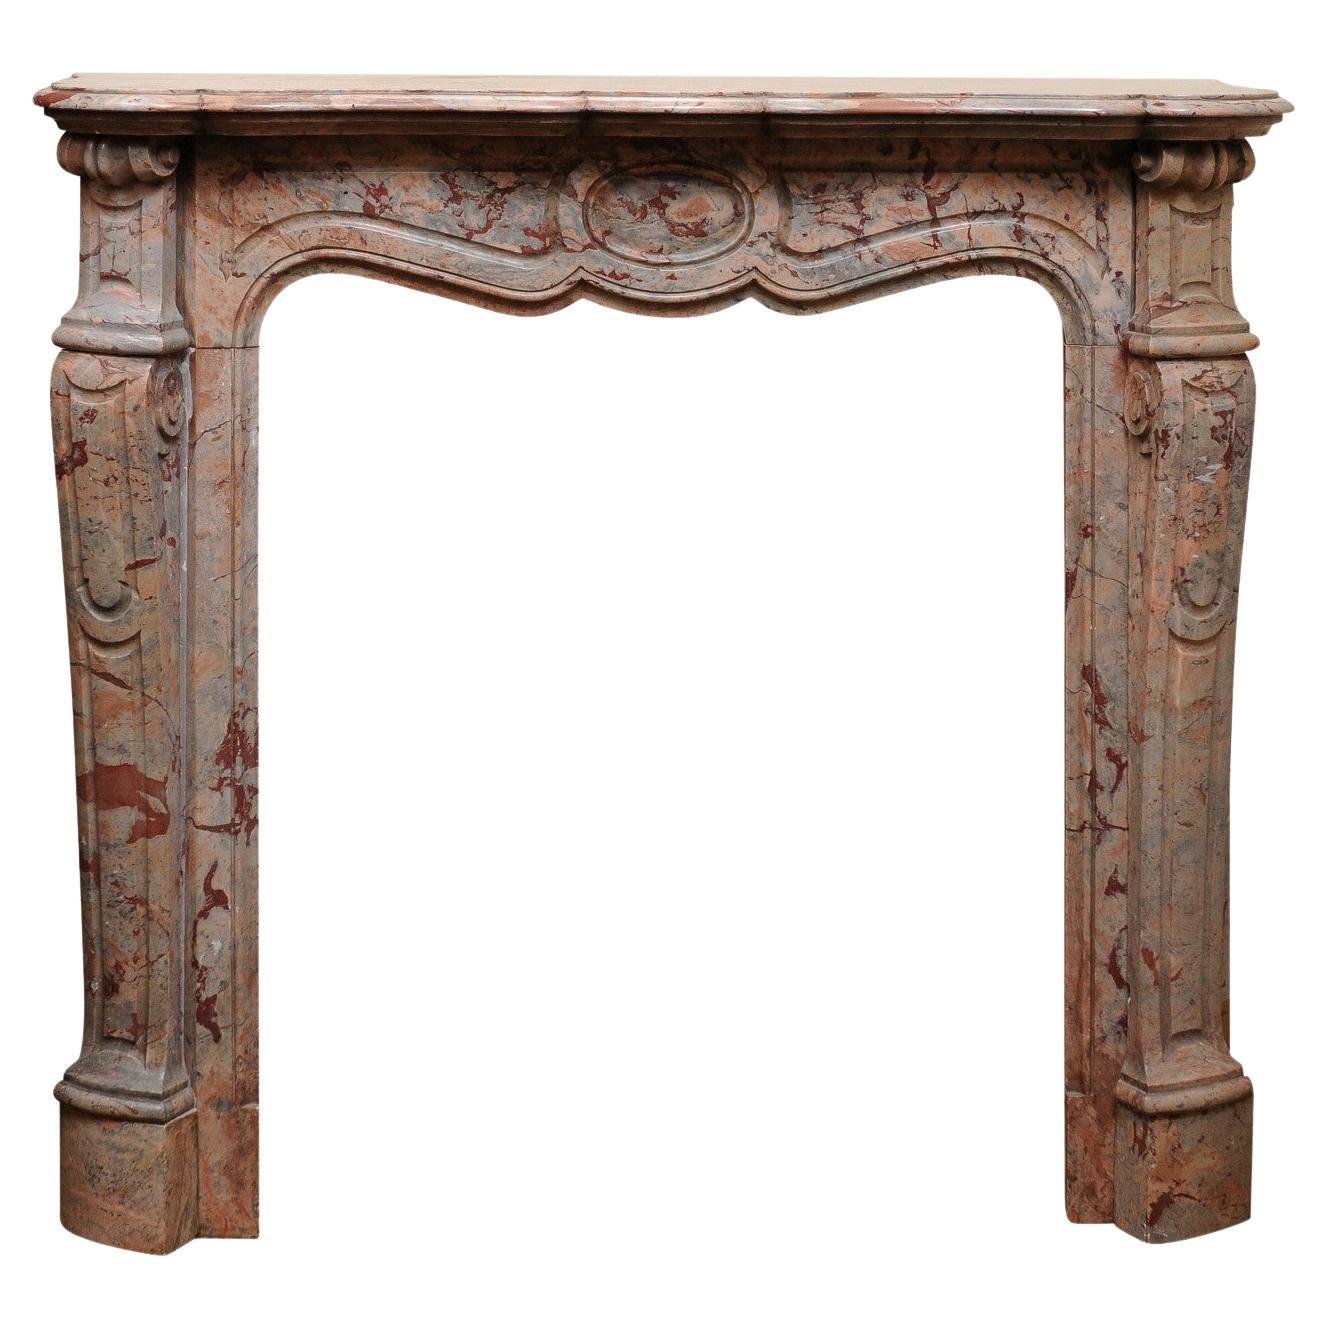 Petite Marble Mantel in Salmon & Grey Hues, 19th Century France For Sale